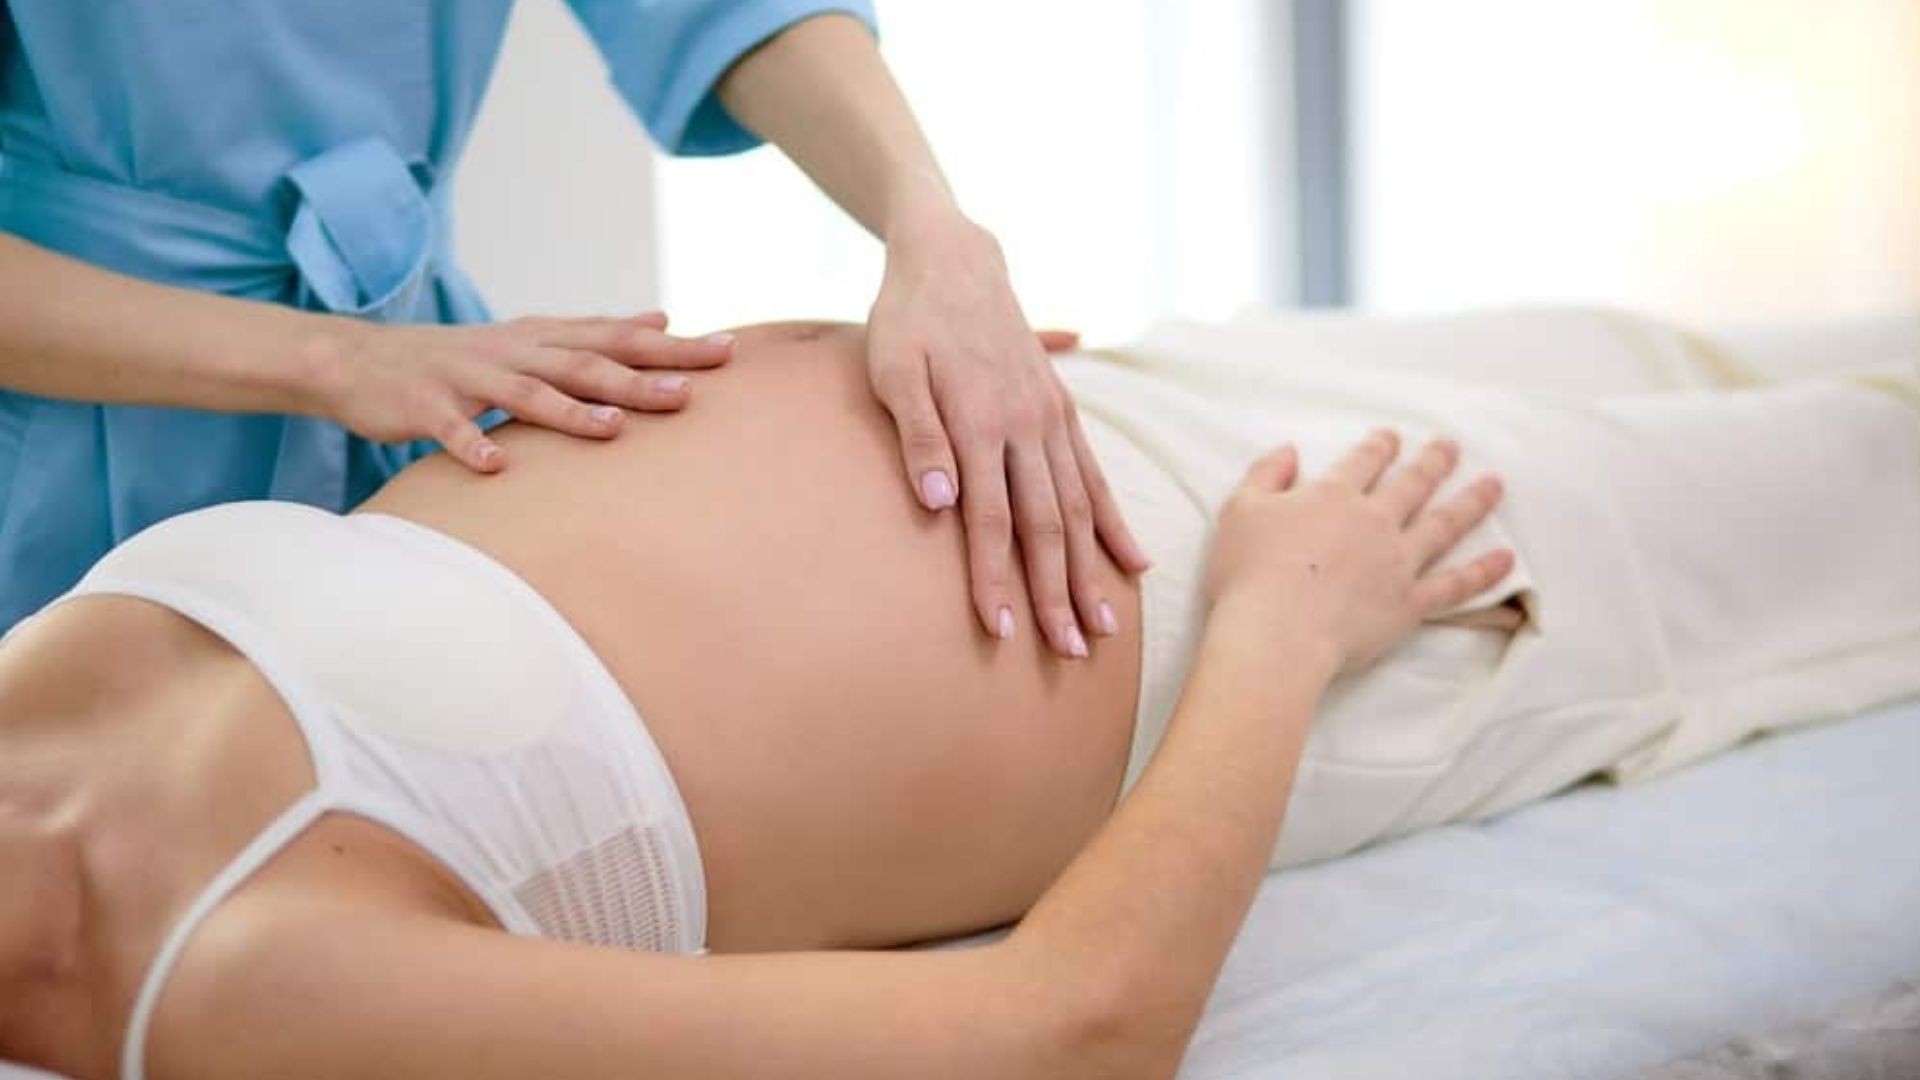 What to Look for When Choosing a Prenatal Chiropractor